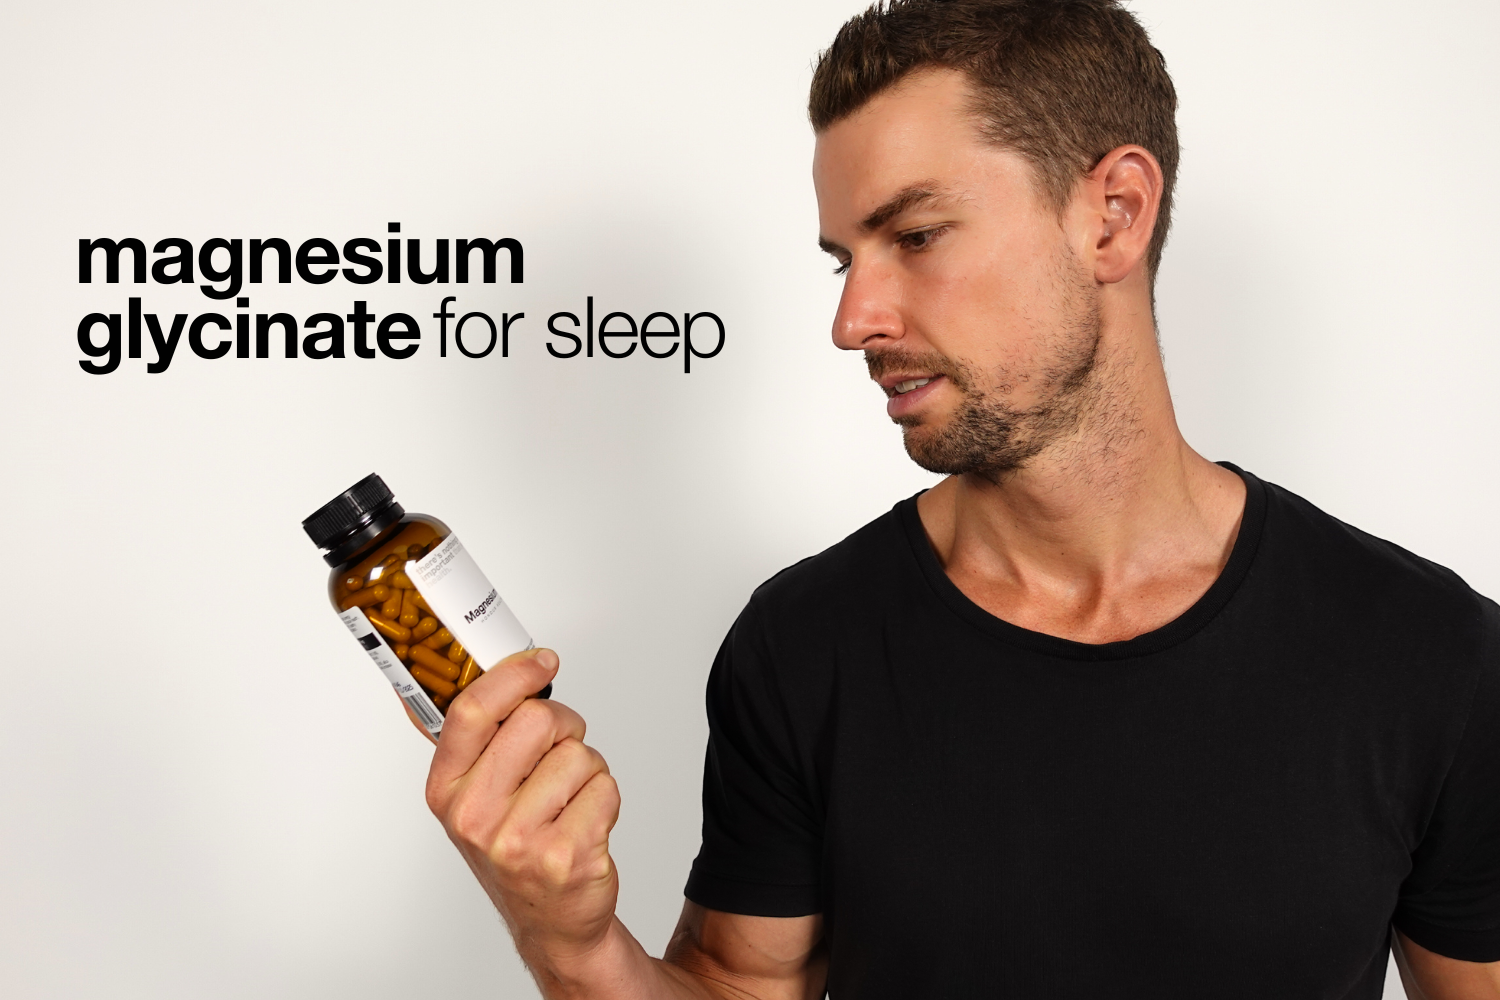 Why Magnesium Glycinate Is Recommended For Sleep